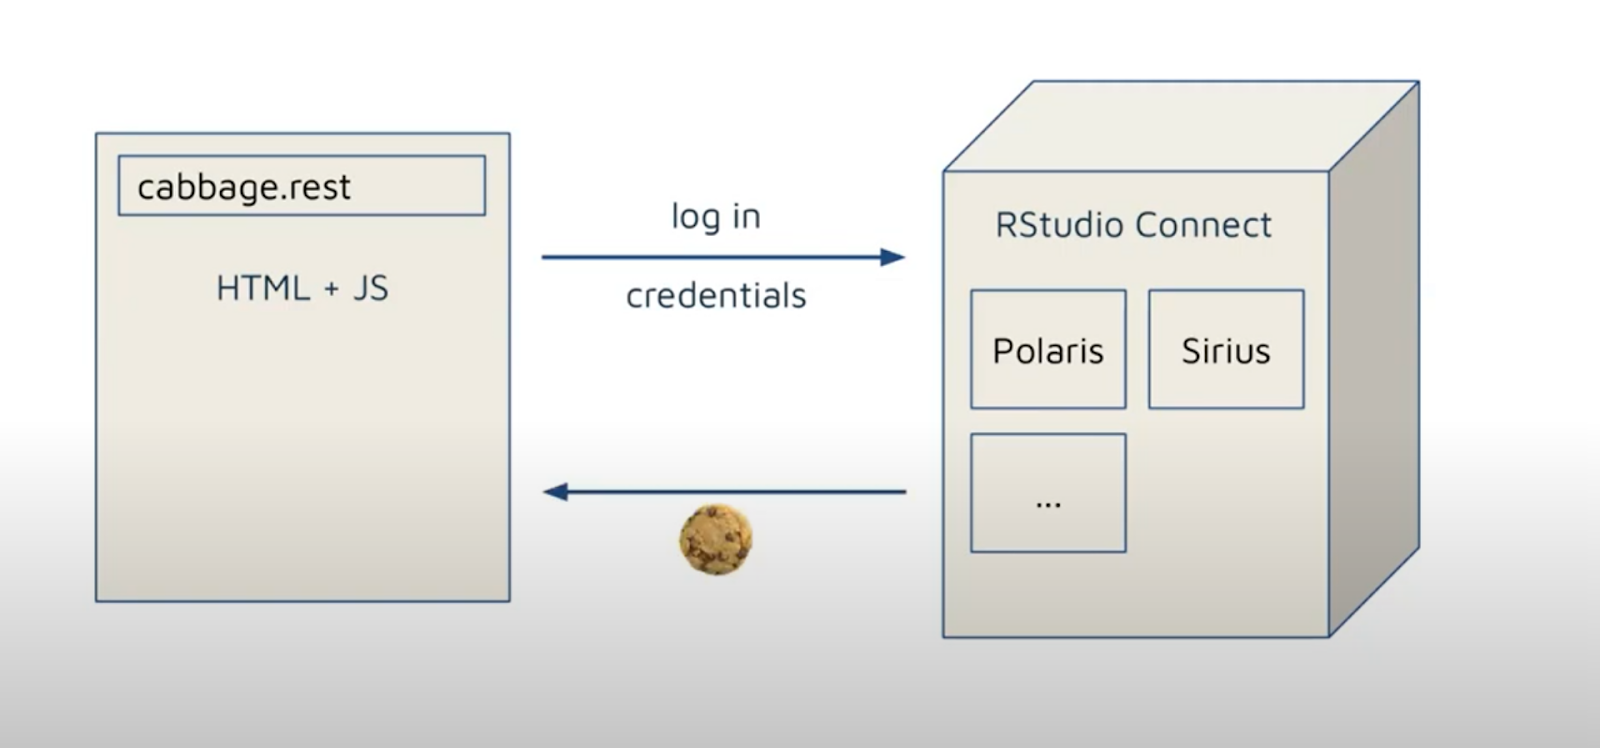 rstudio connect log in credentials path